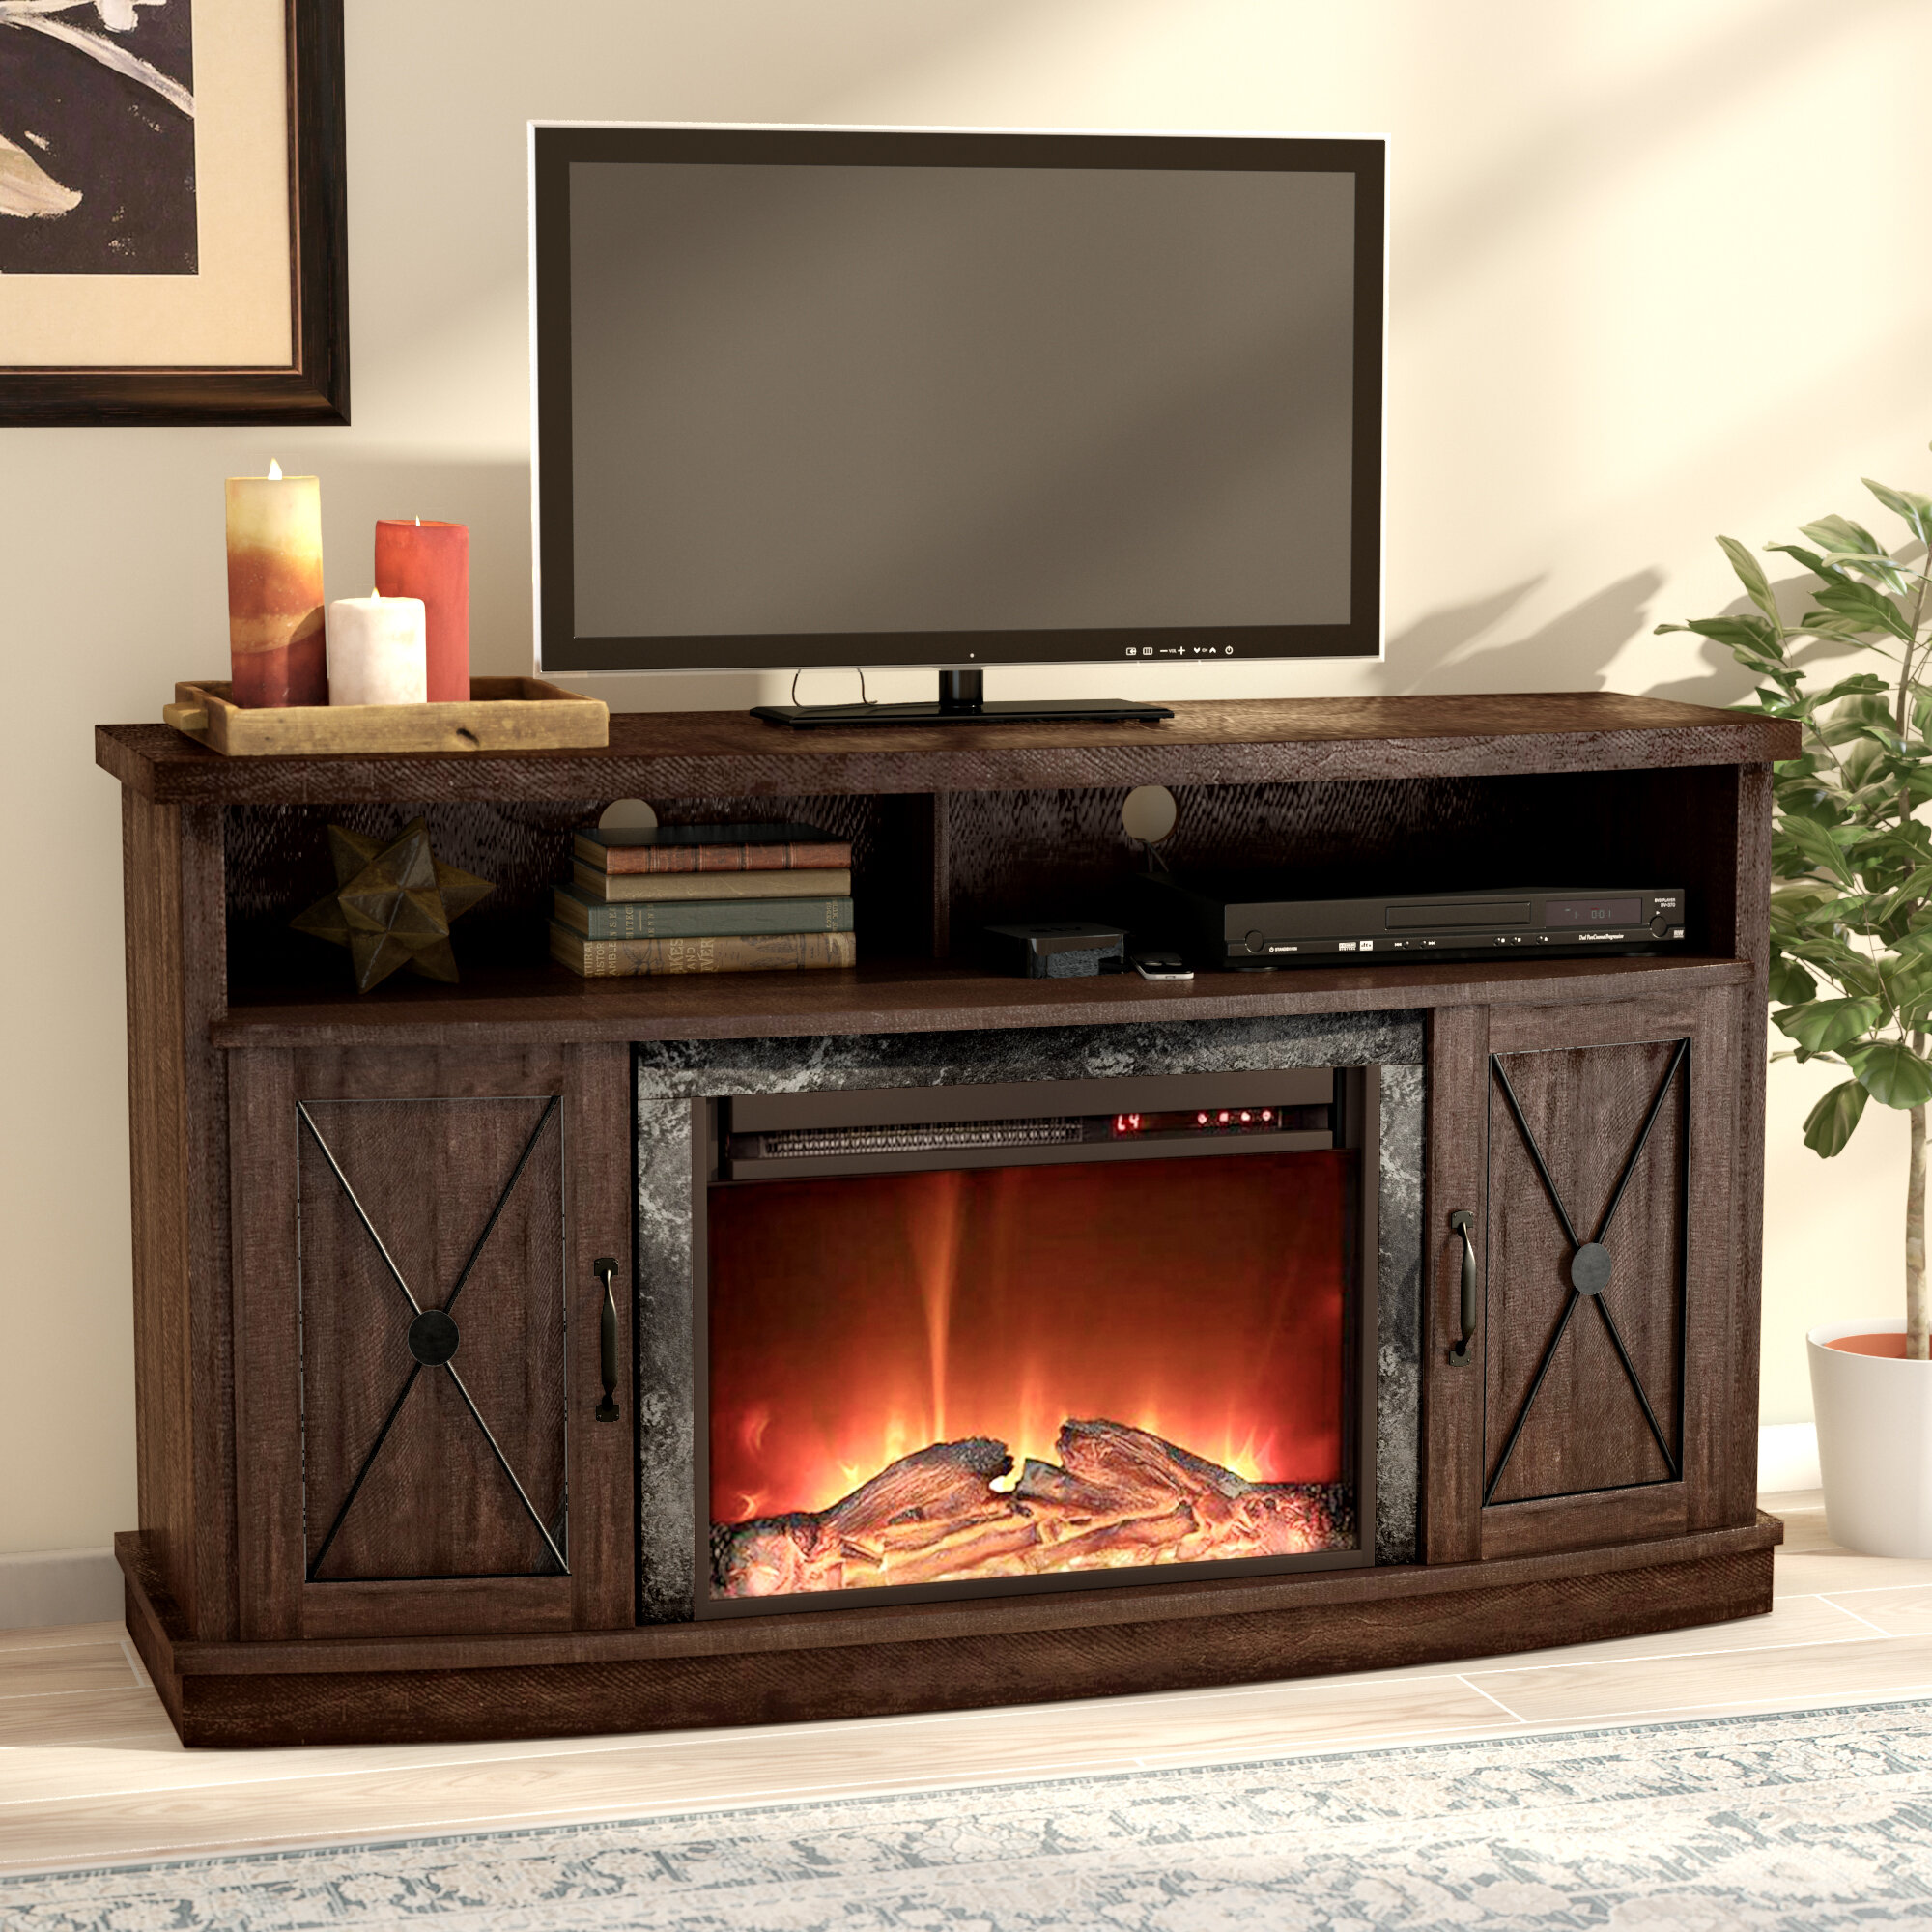 65 Inch Electric Fireplace Tv Stand Lovely Media Fireplace with Remote